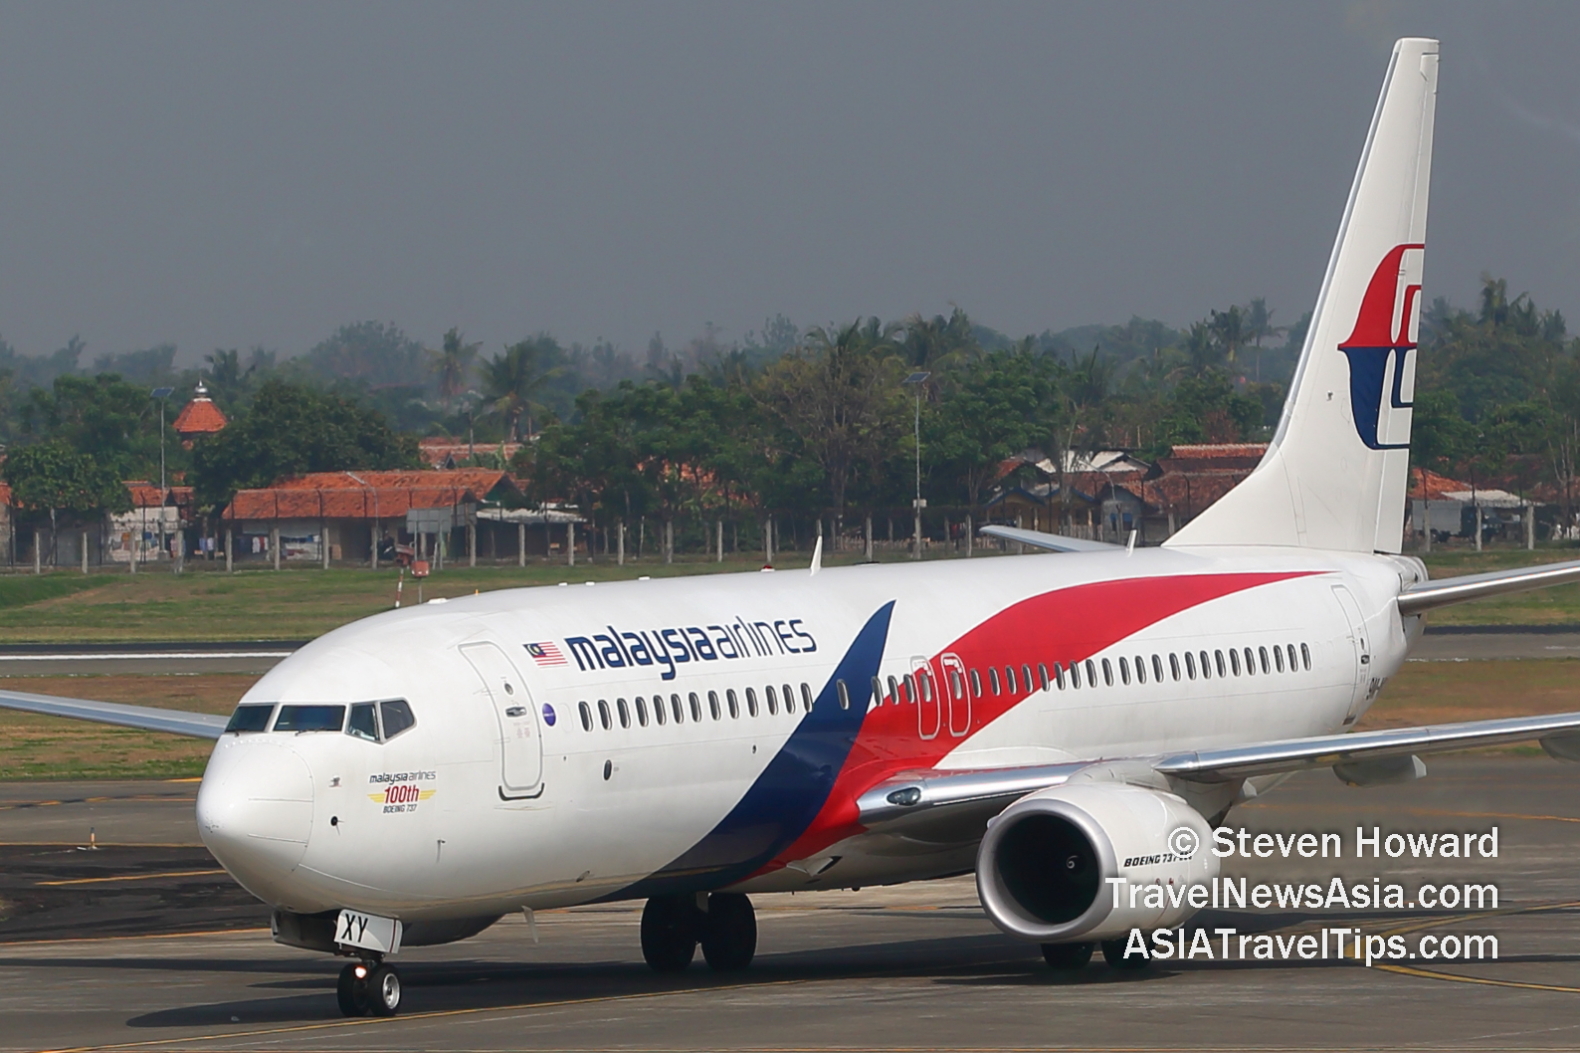 Malaysia Airlines B737-8. Picture by Steven Howard of TravelNewsAsia.com Click to enlarge.